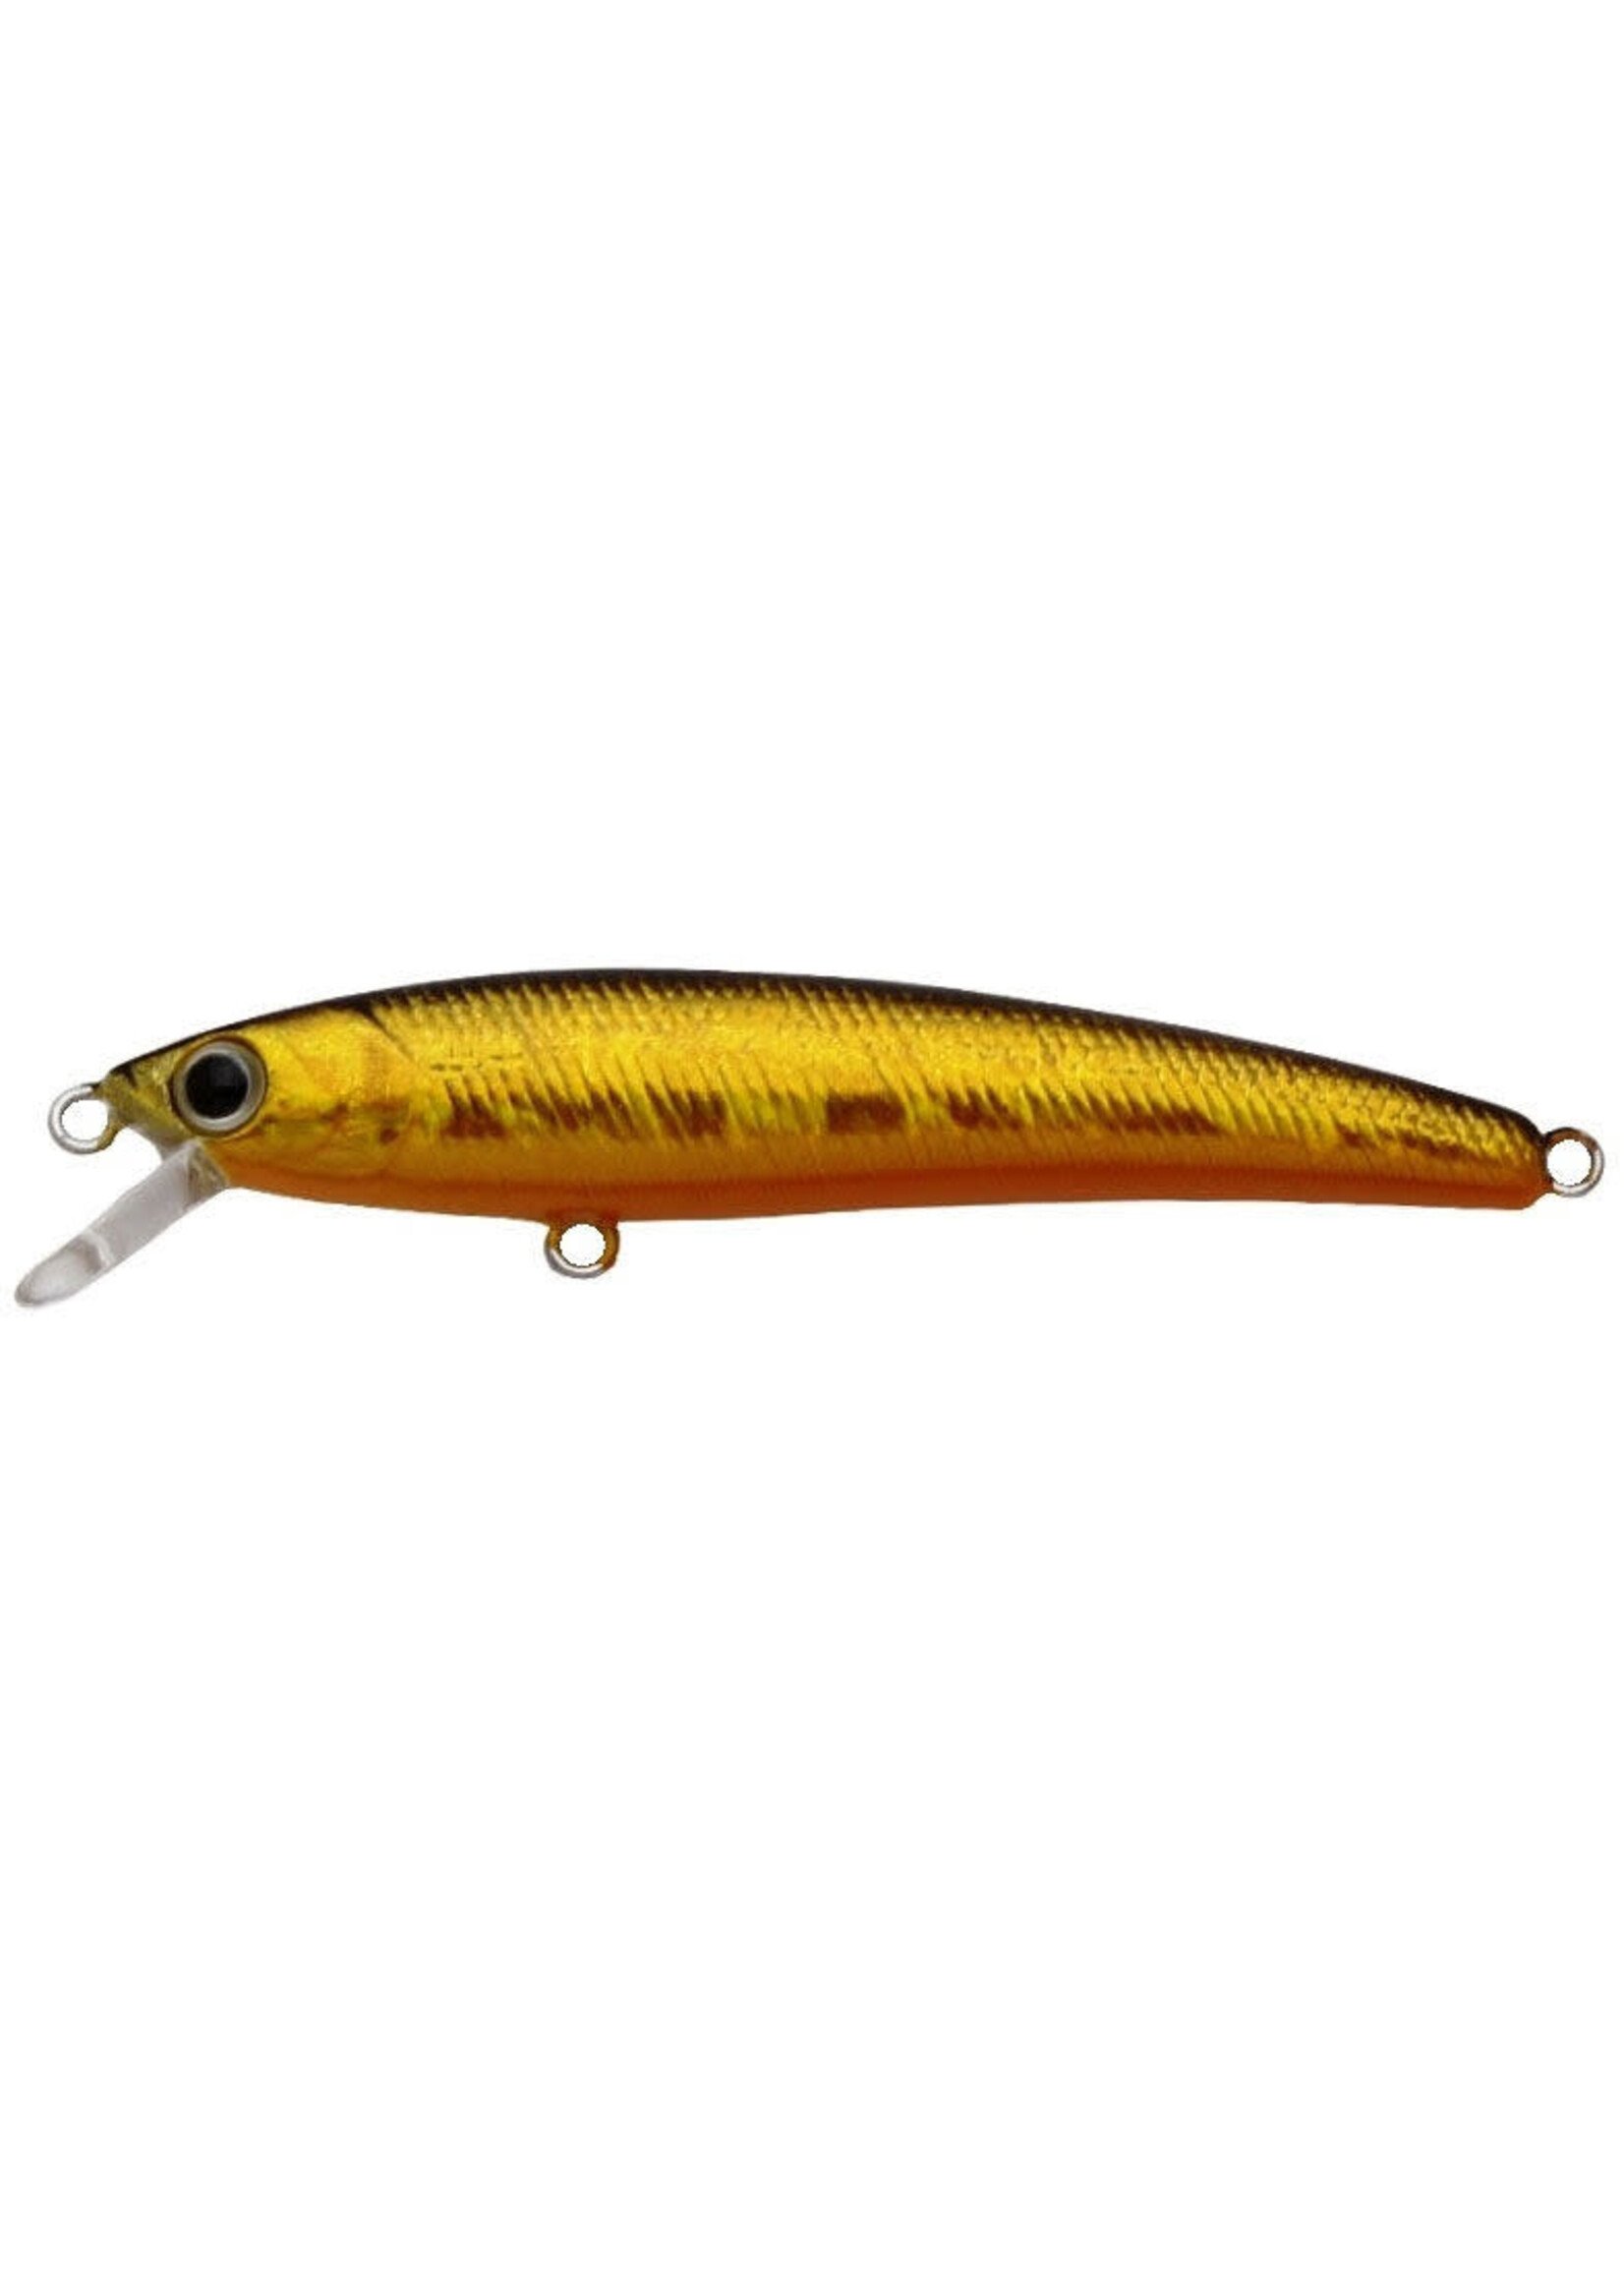 Challenger Micro Floating Minnow - 2 3/8 - 3/32oz, Mother of White